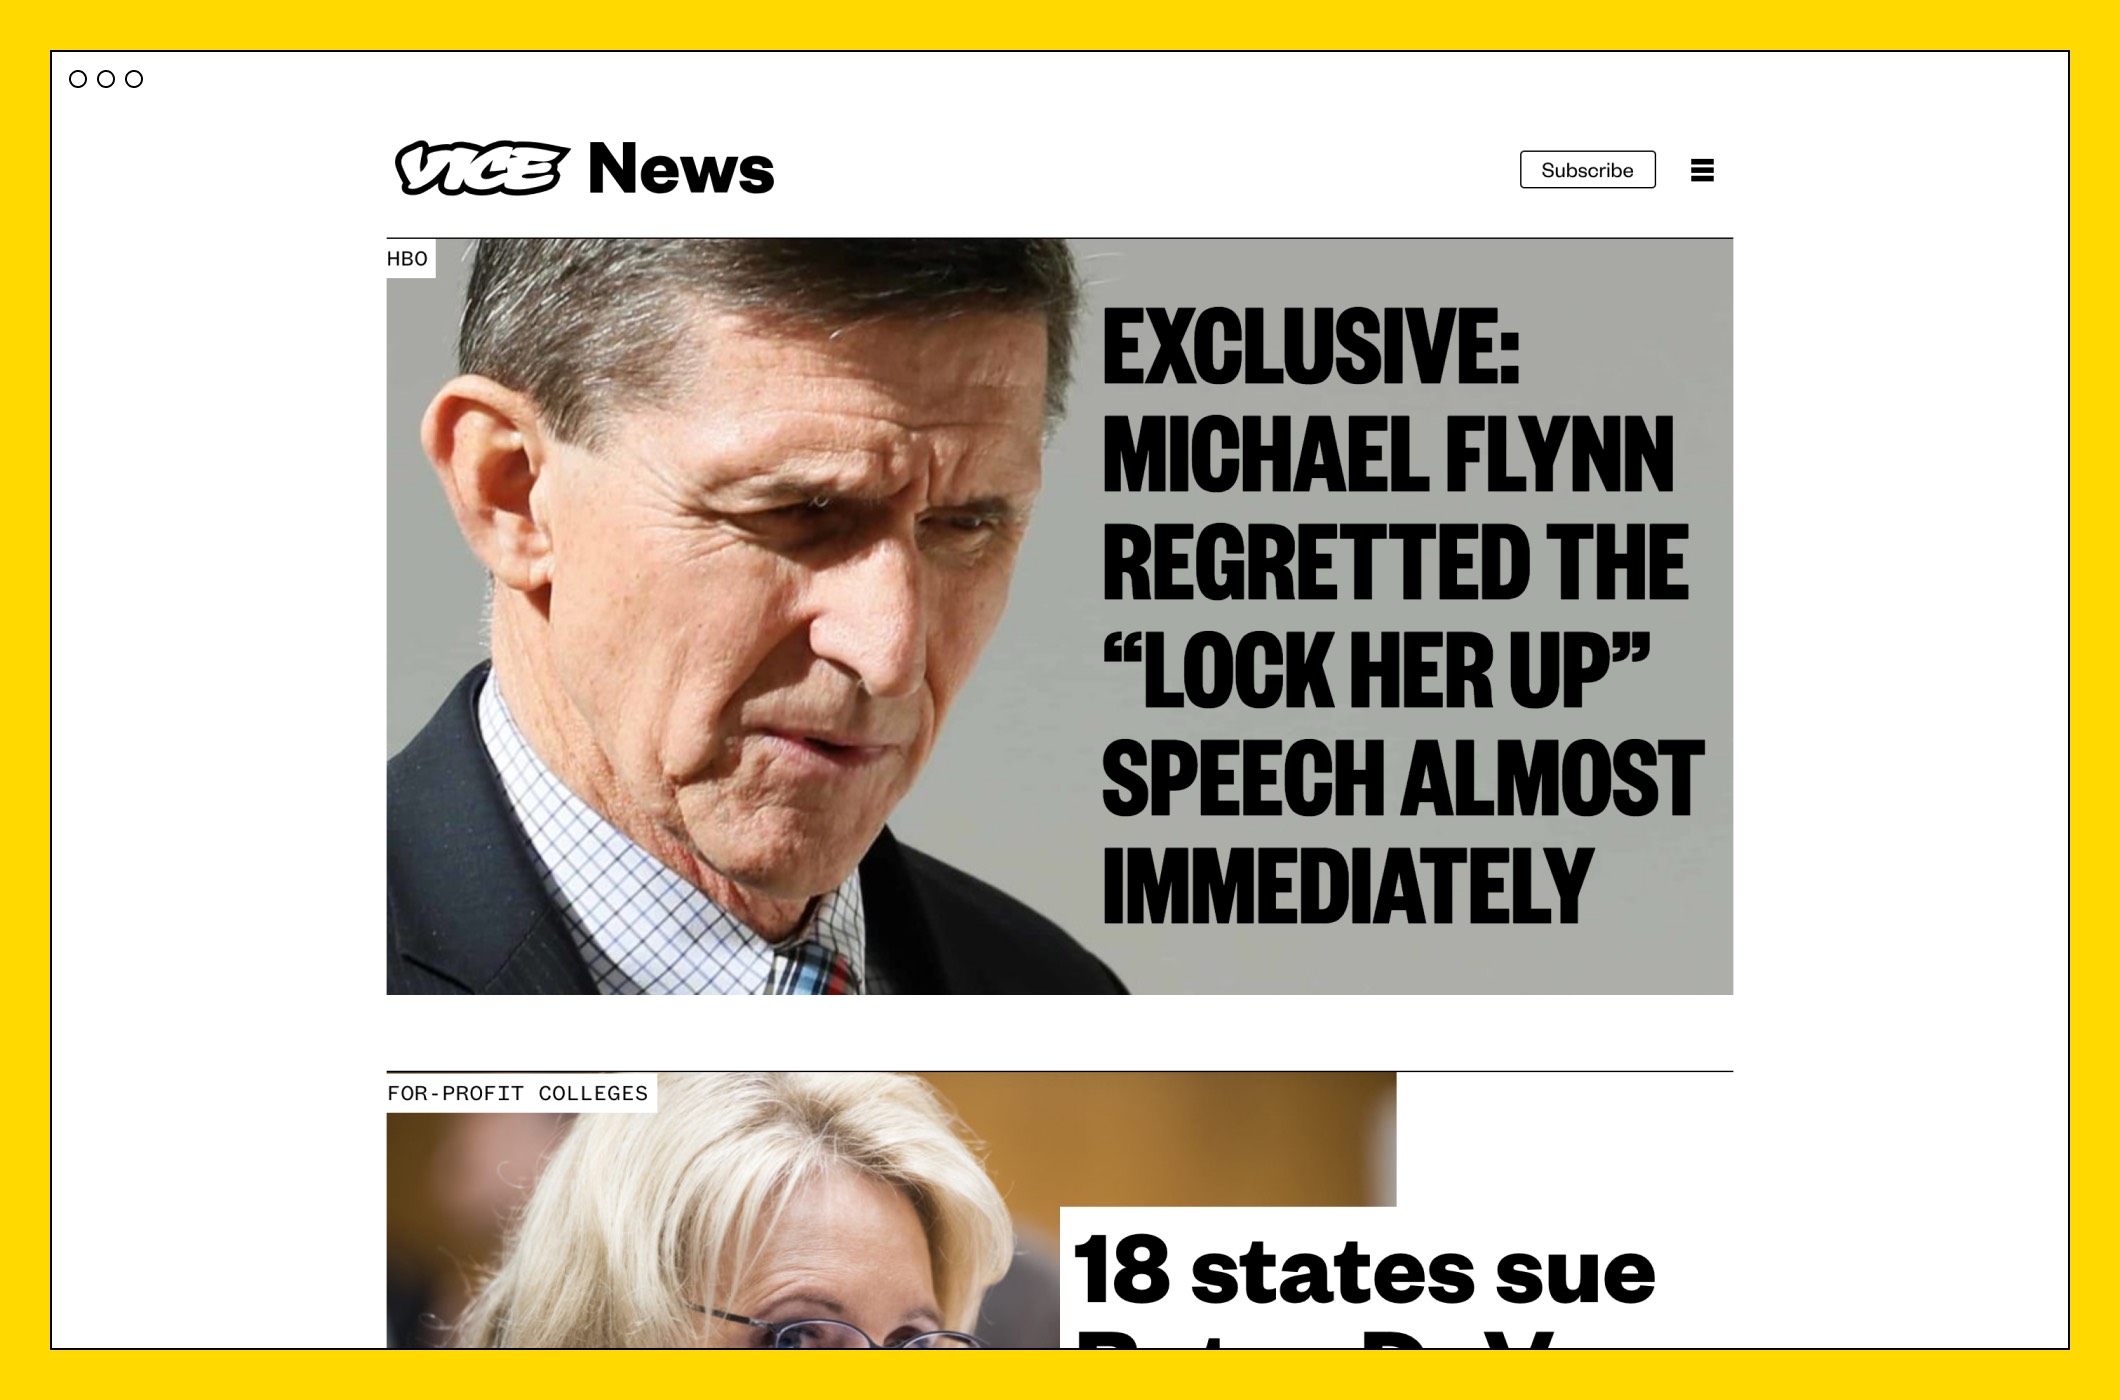 Vice News article on the Homepage